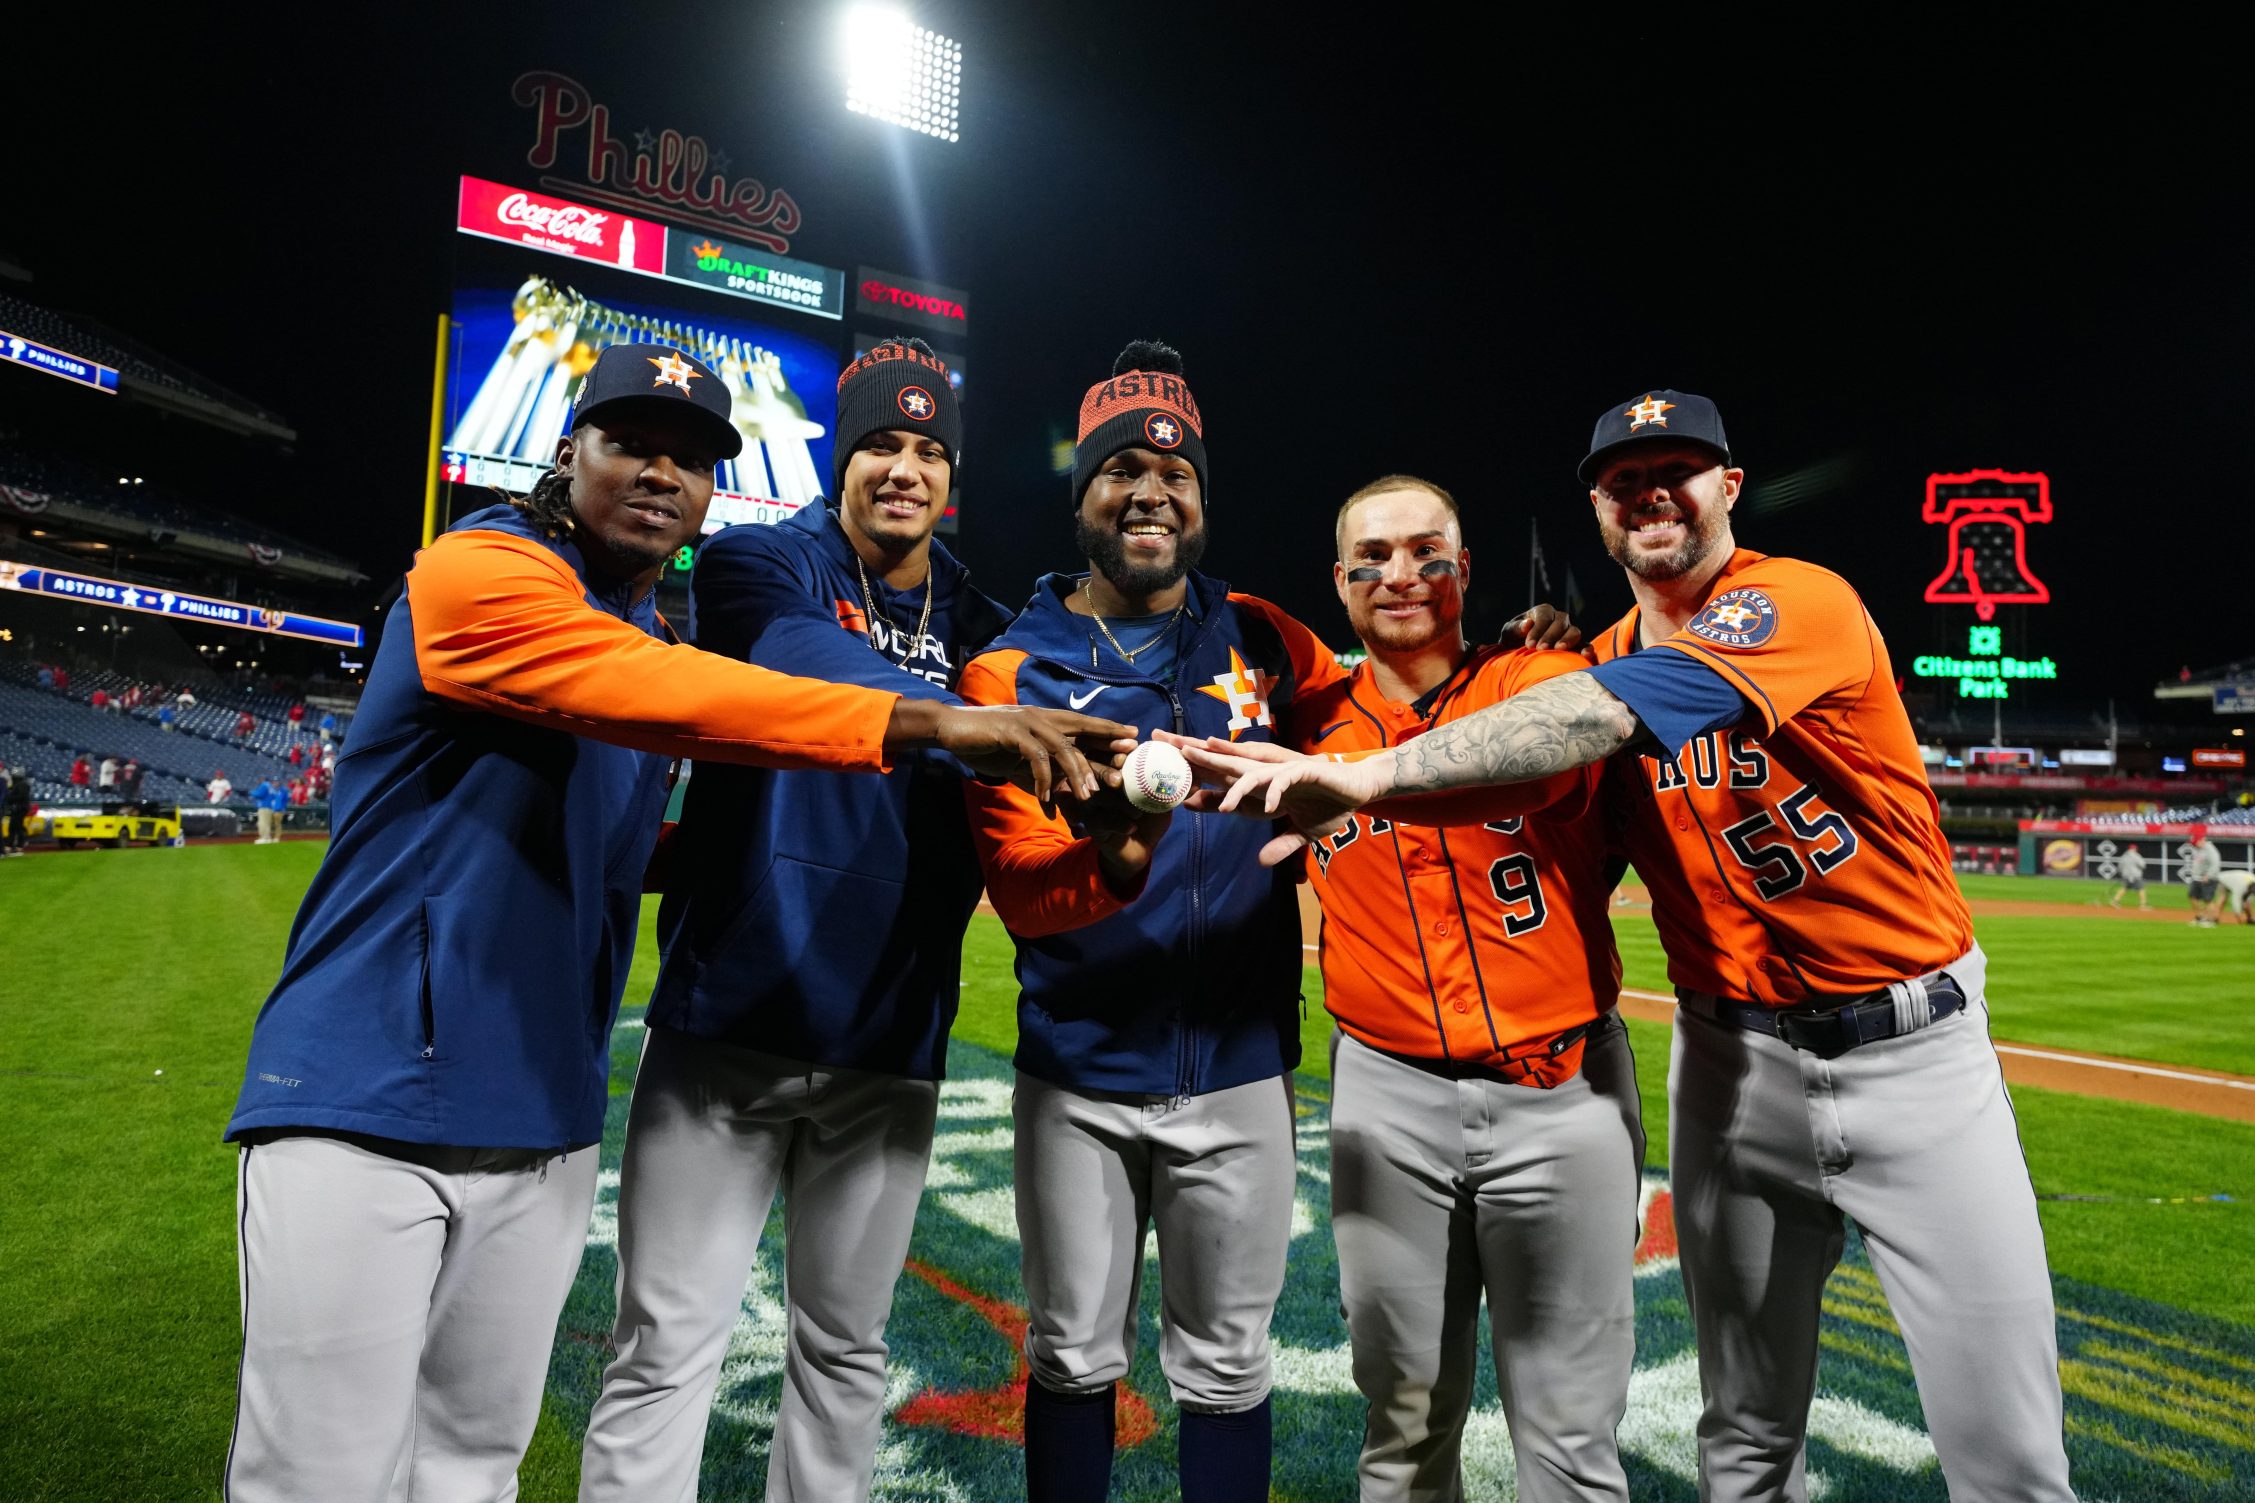 Rafael Montero #47, Bryan Abreu #52, Cristian Javier #53, Christian Vázquez #9 and Ryan Pressly #55 of the Houston Astros pose for a photo after their combined no-hitter